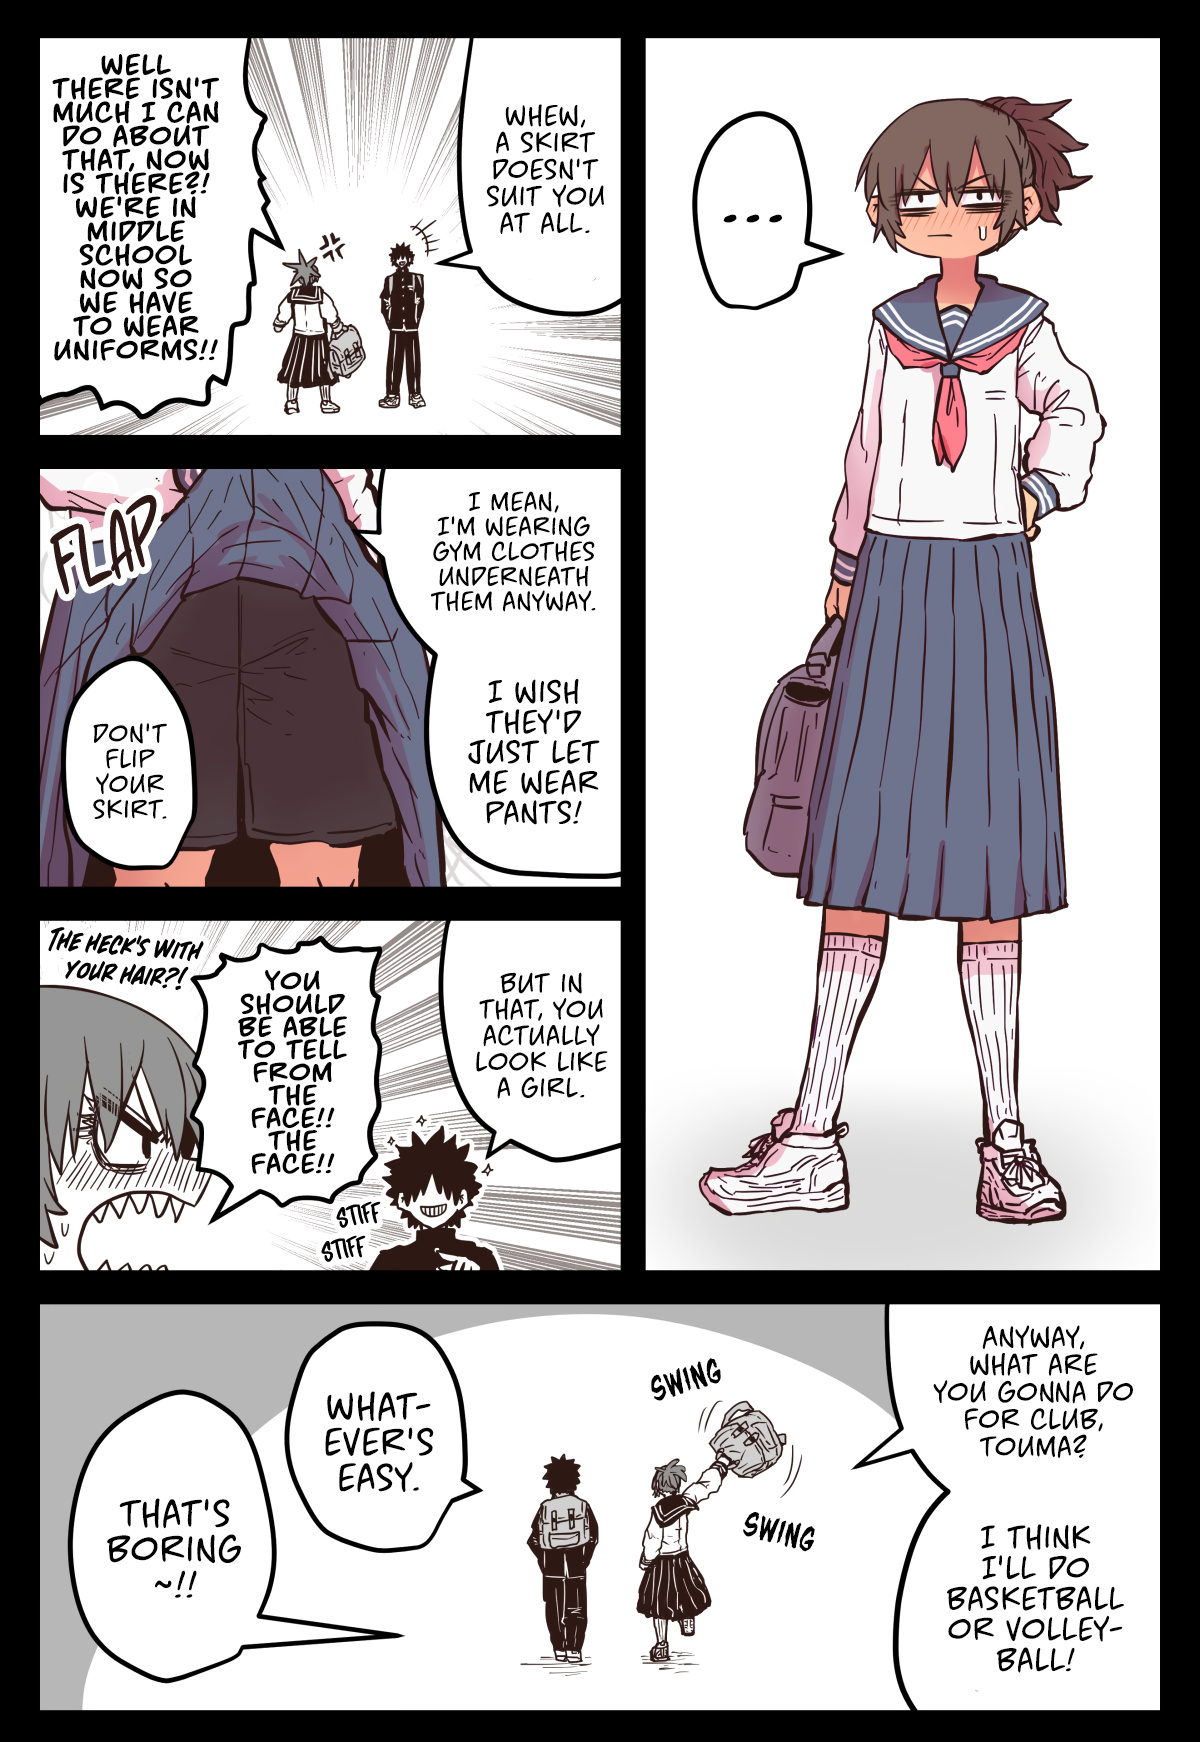 When I Returned To My Hometown, My Childhood Friend Was Broken - Page 2